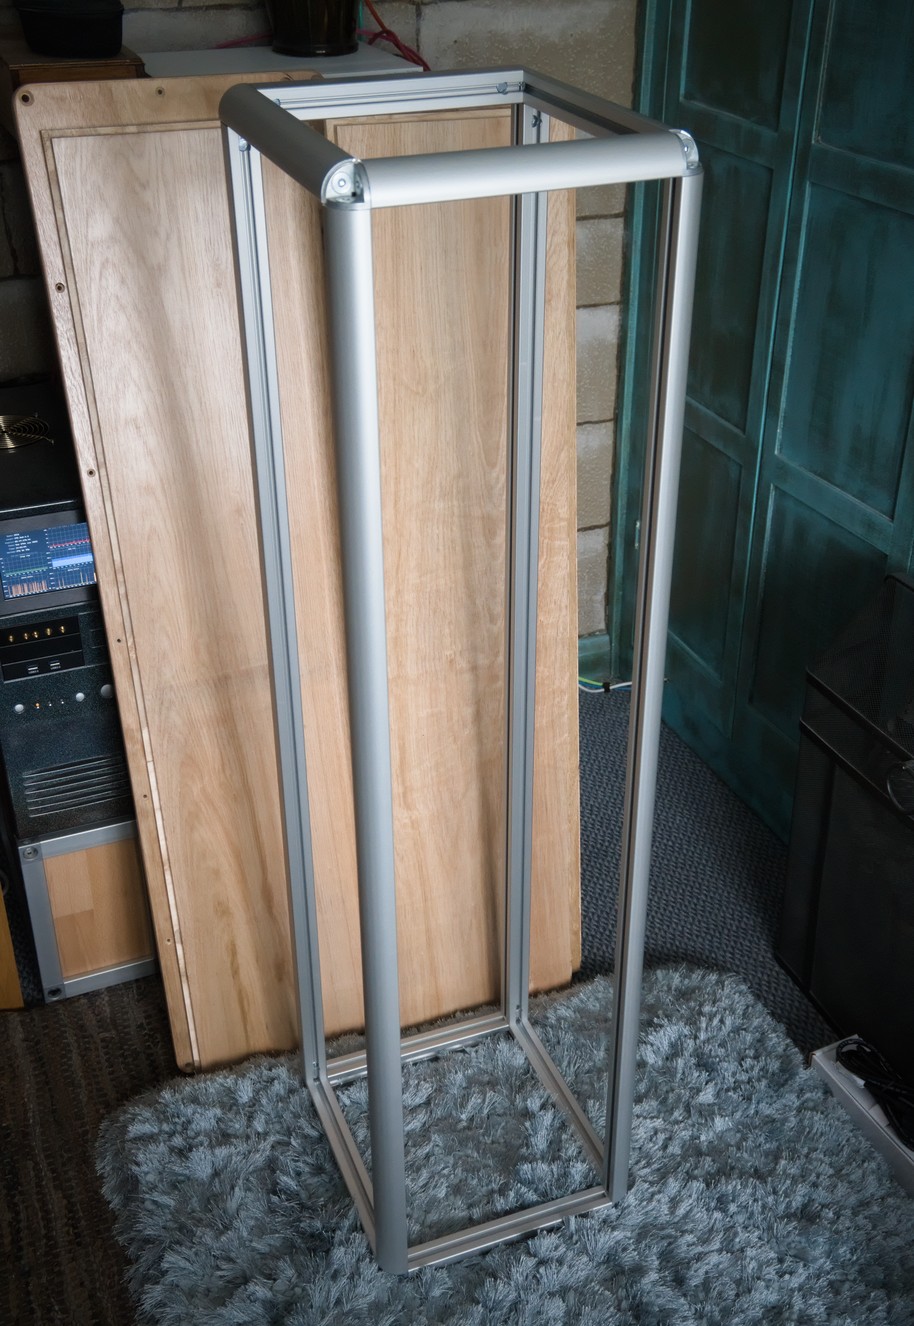 The aluminium extrusions form a tall box shape when connected together.